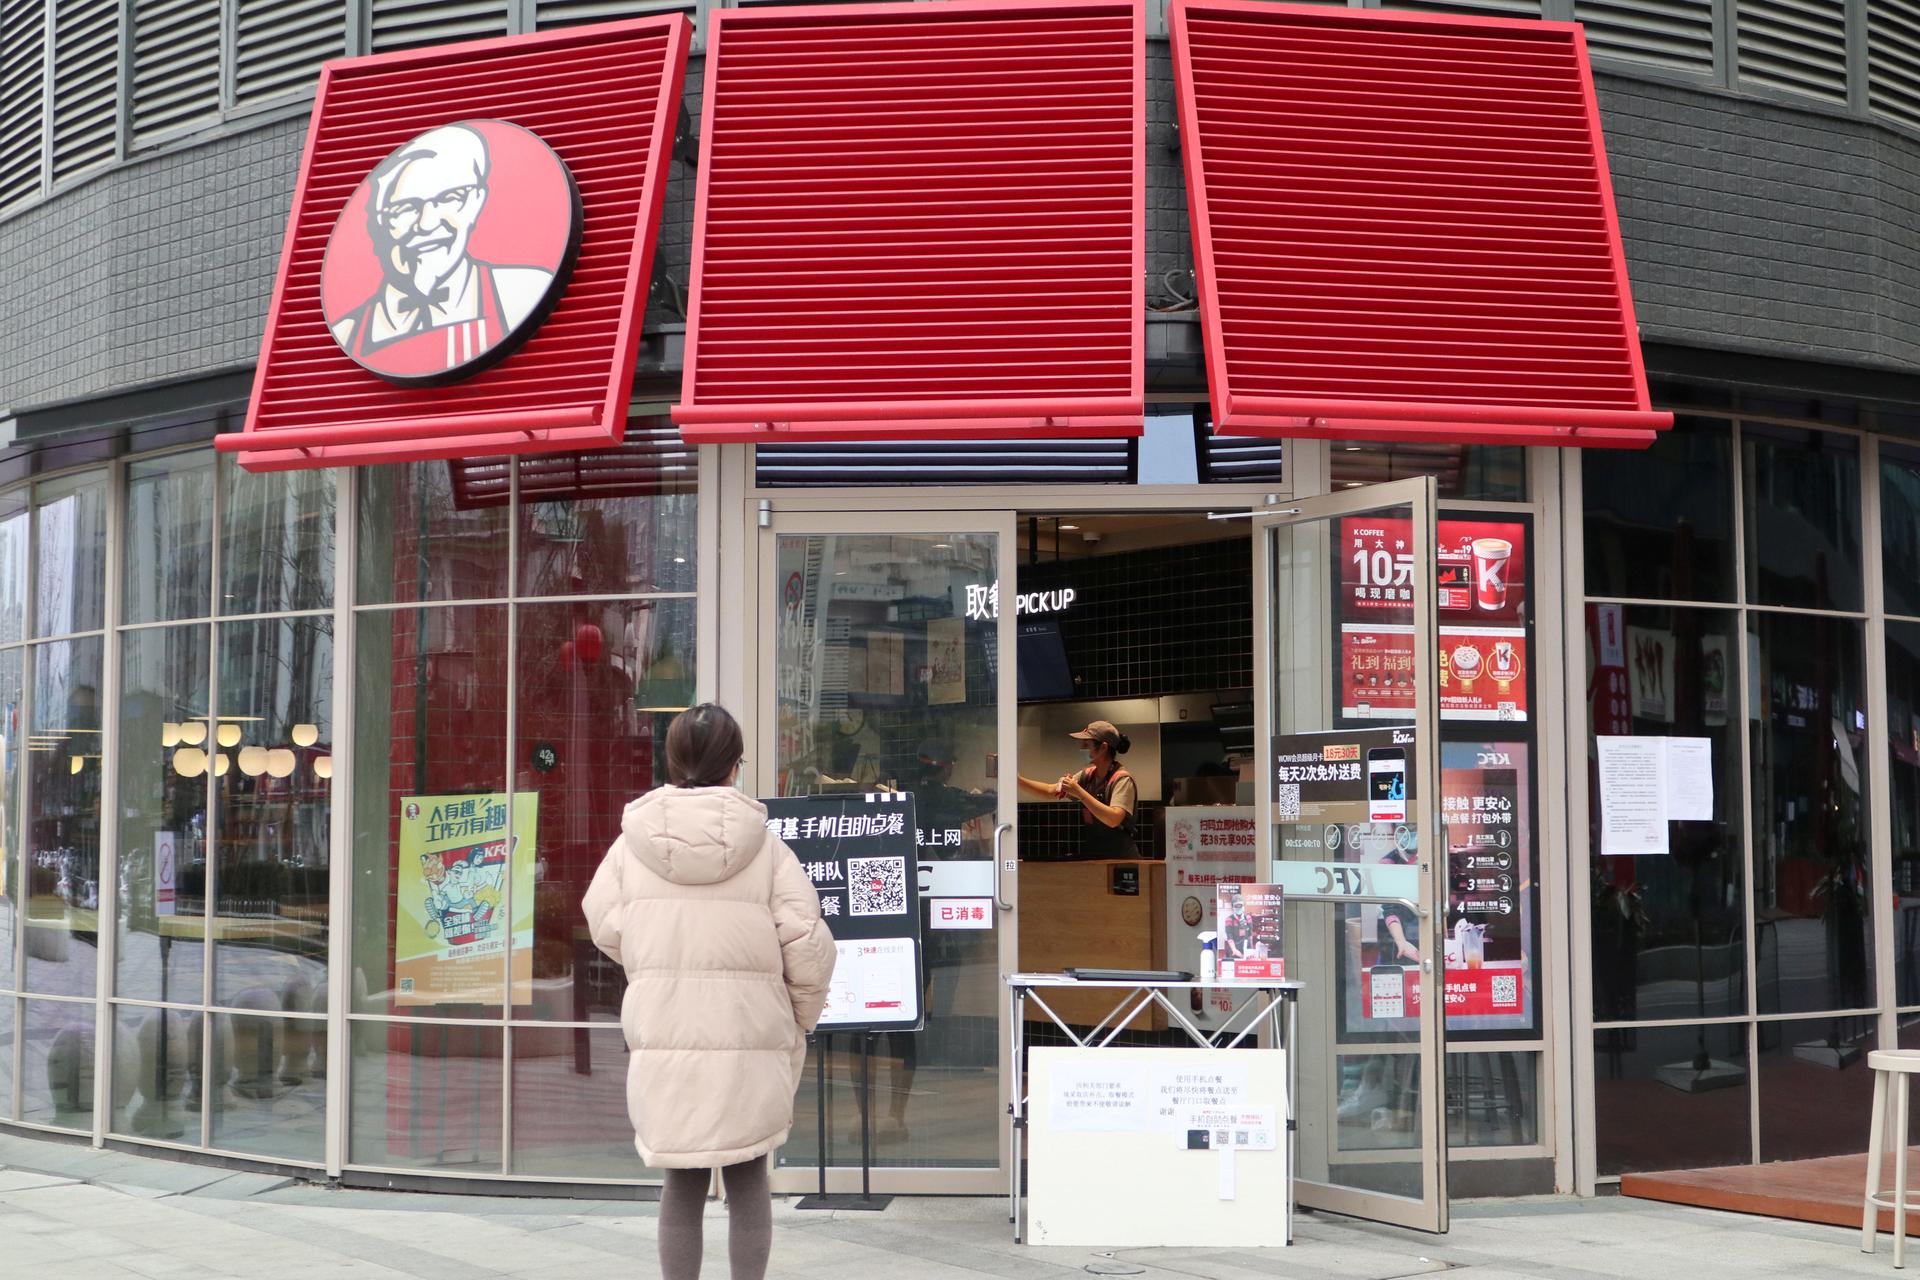 Fast-food companies in China step up ‘contactless’ pickup, delivery as coronavirus rages